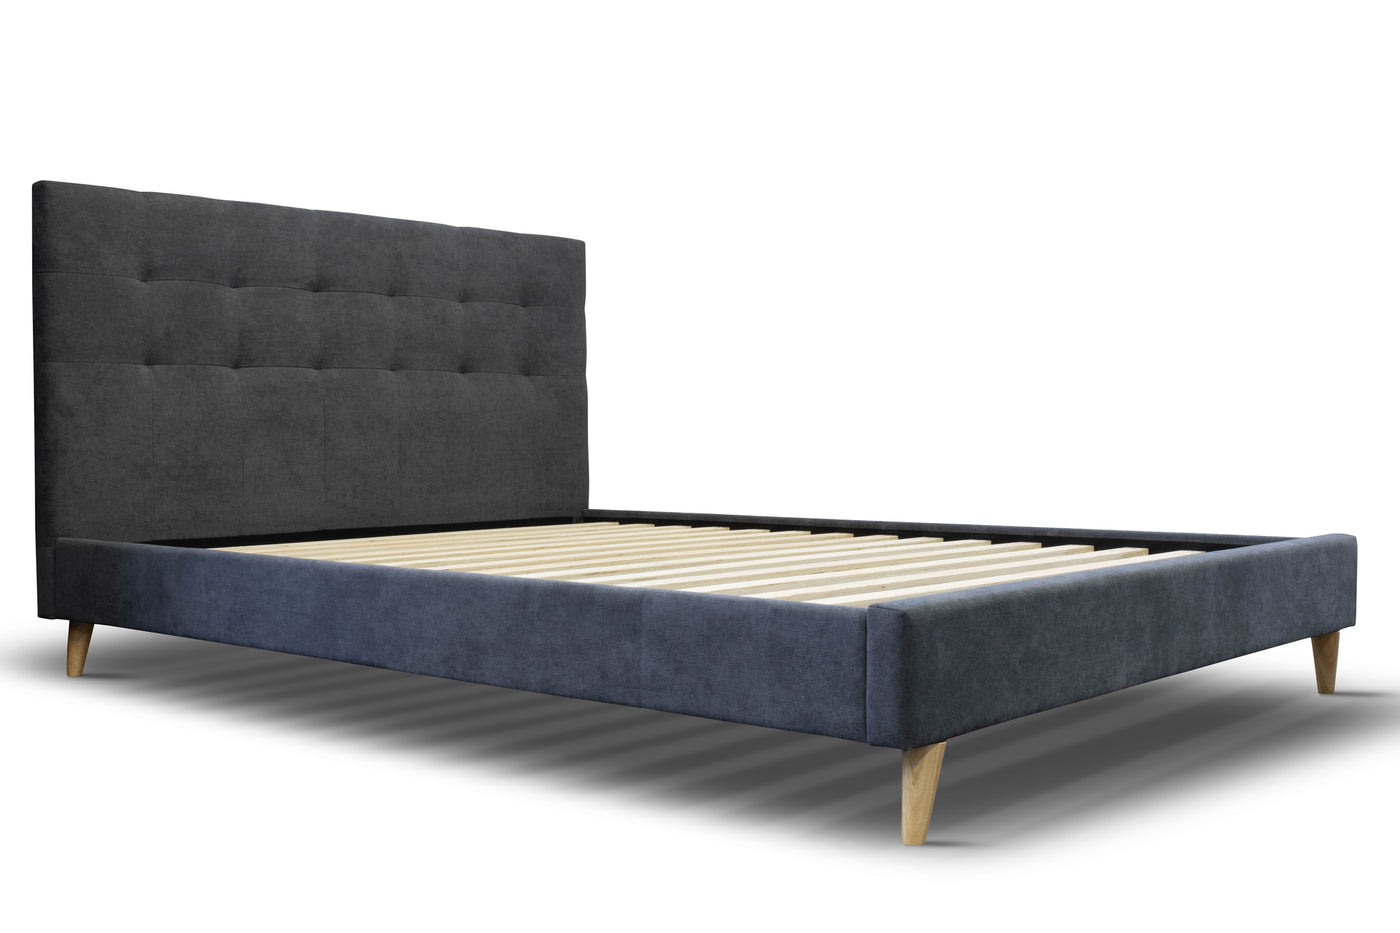 Ricky Bed Frame (Charcoal Polyester) (7691549704446)